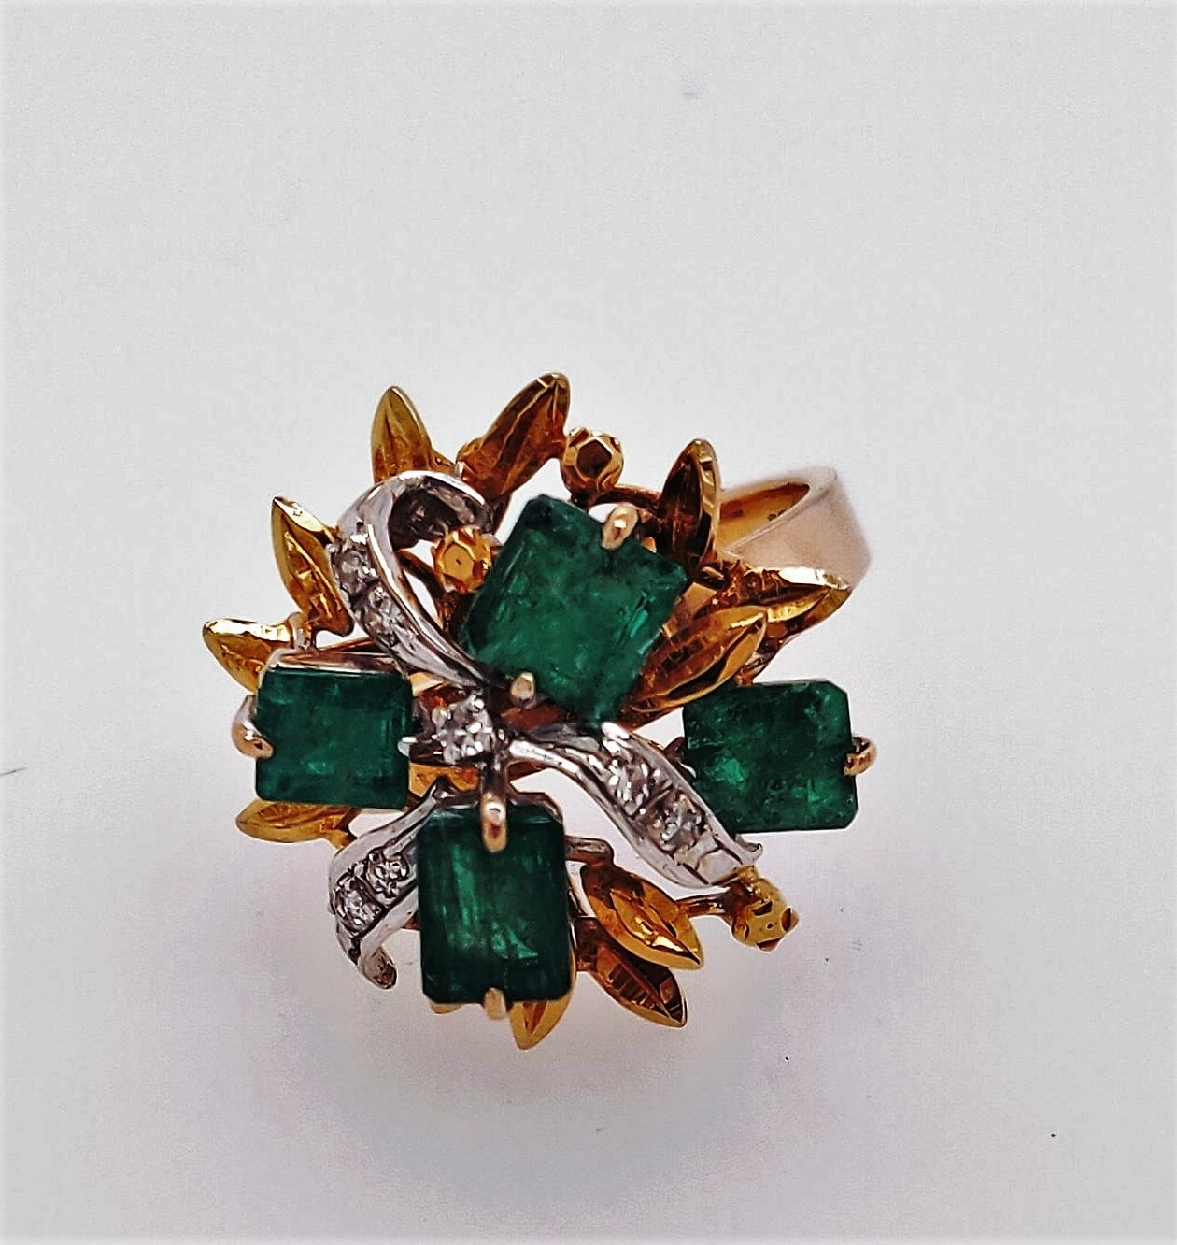 14k Two-tone Gold Ring with Emeralds and Diamond accents
size 6.25